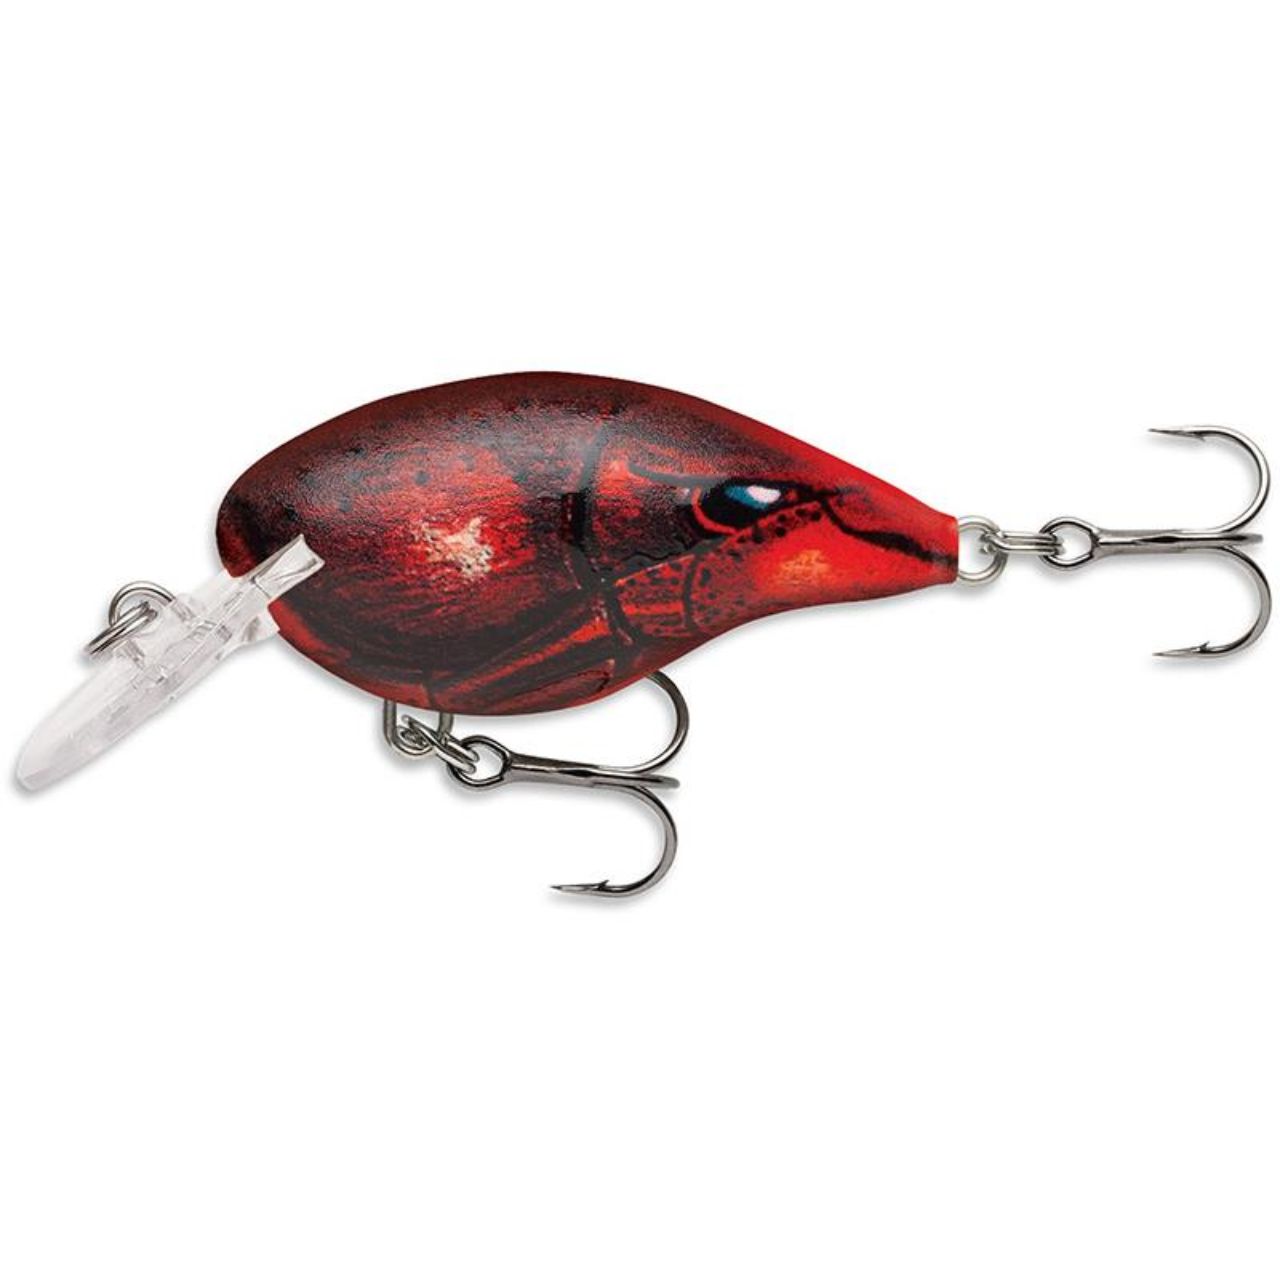 RAPALA DIVES-TO DT 16 RA5819263.jpg